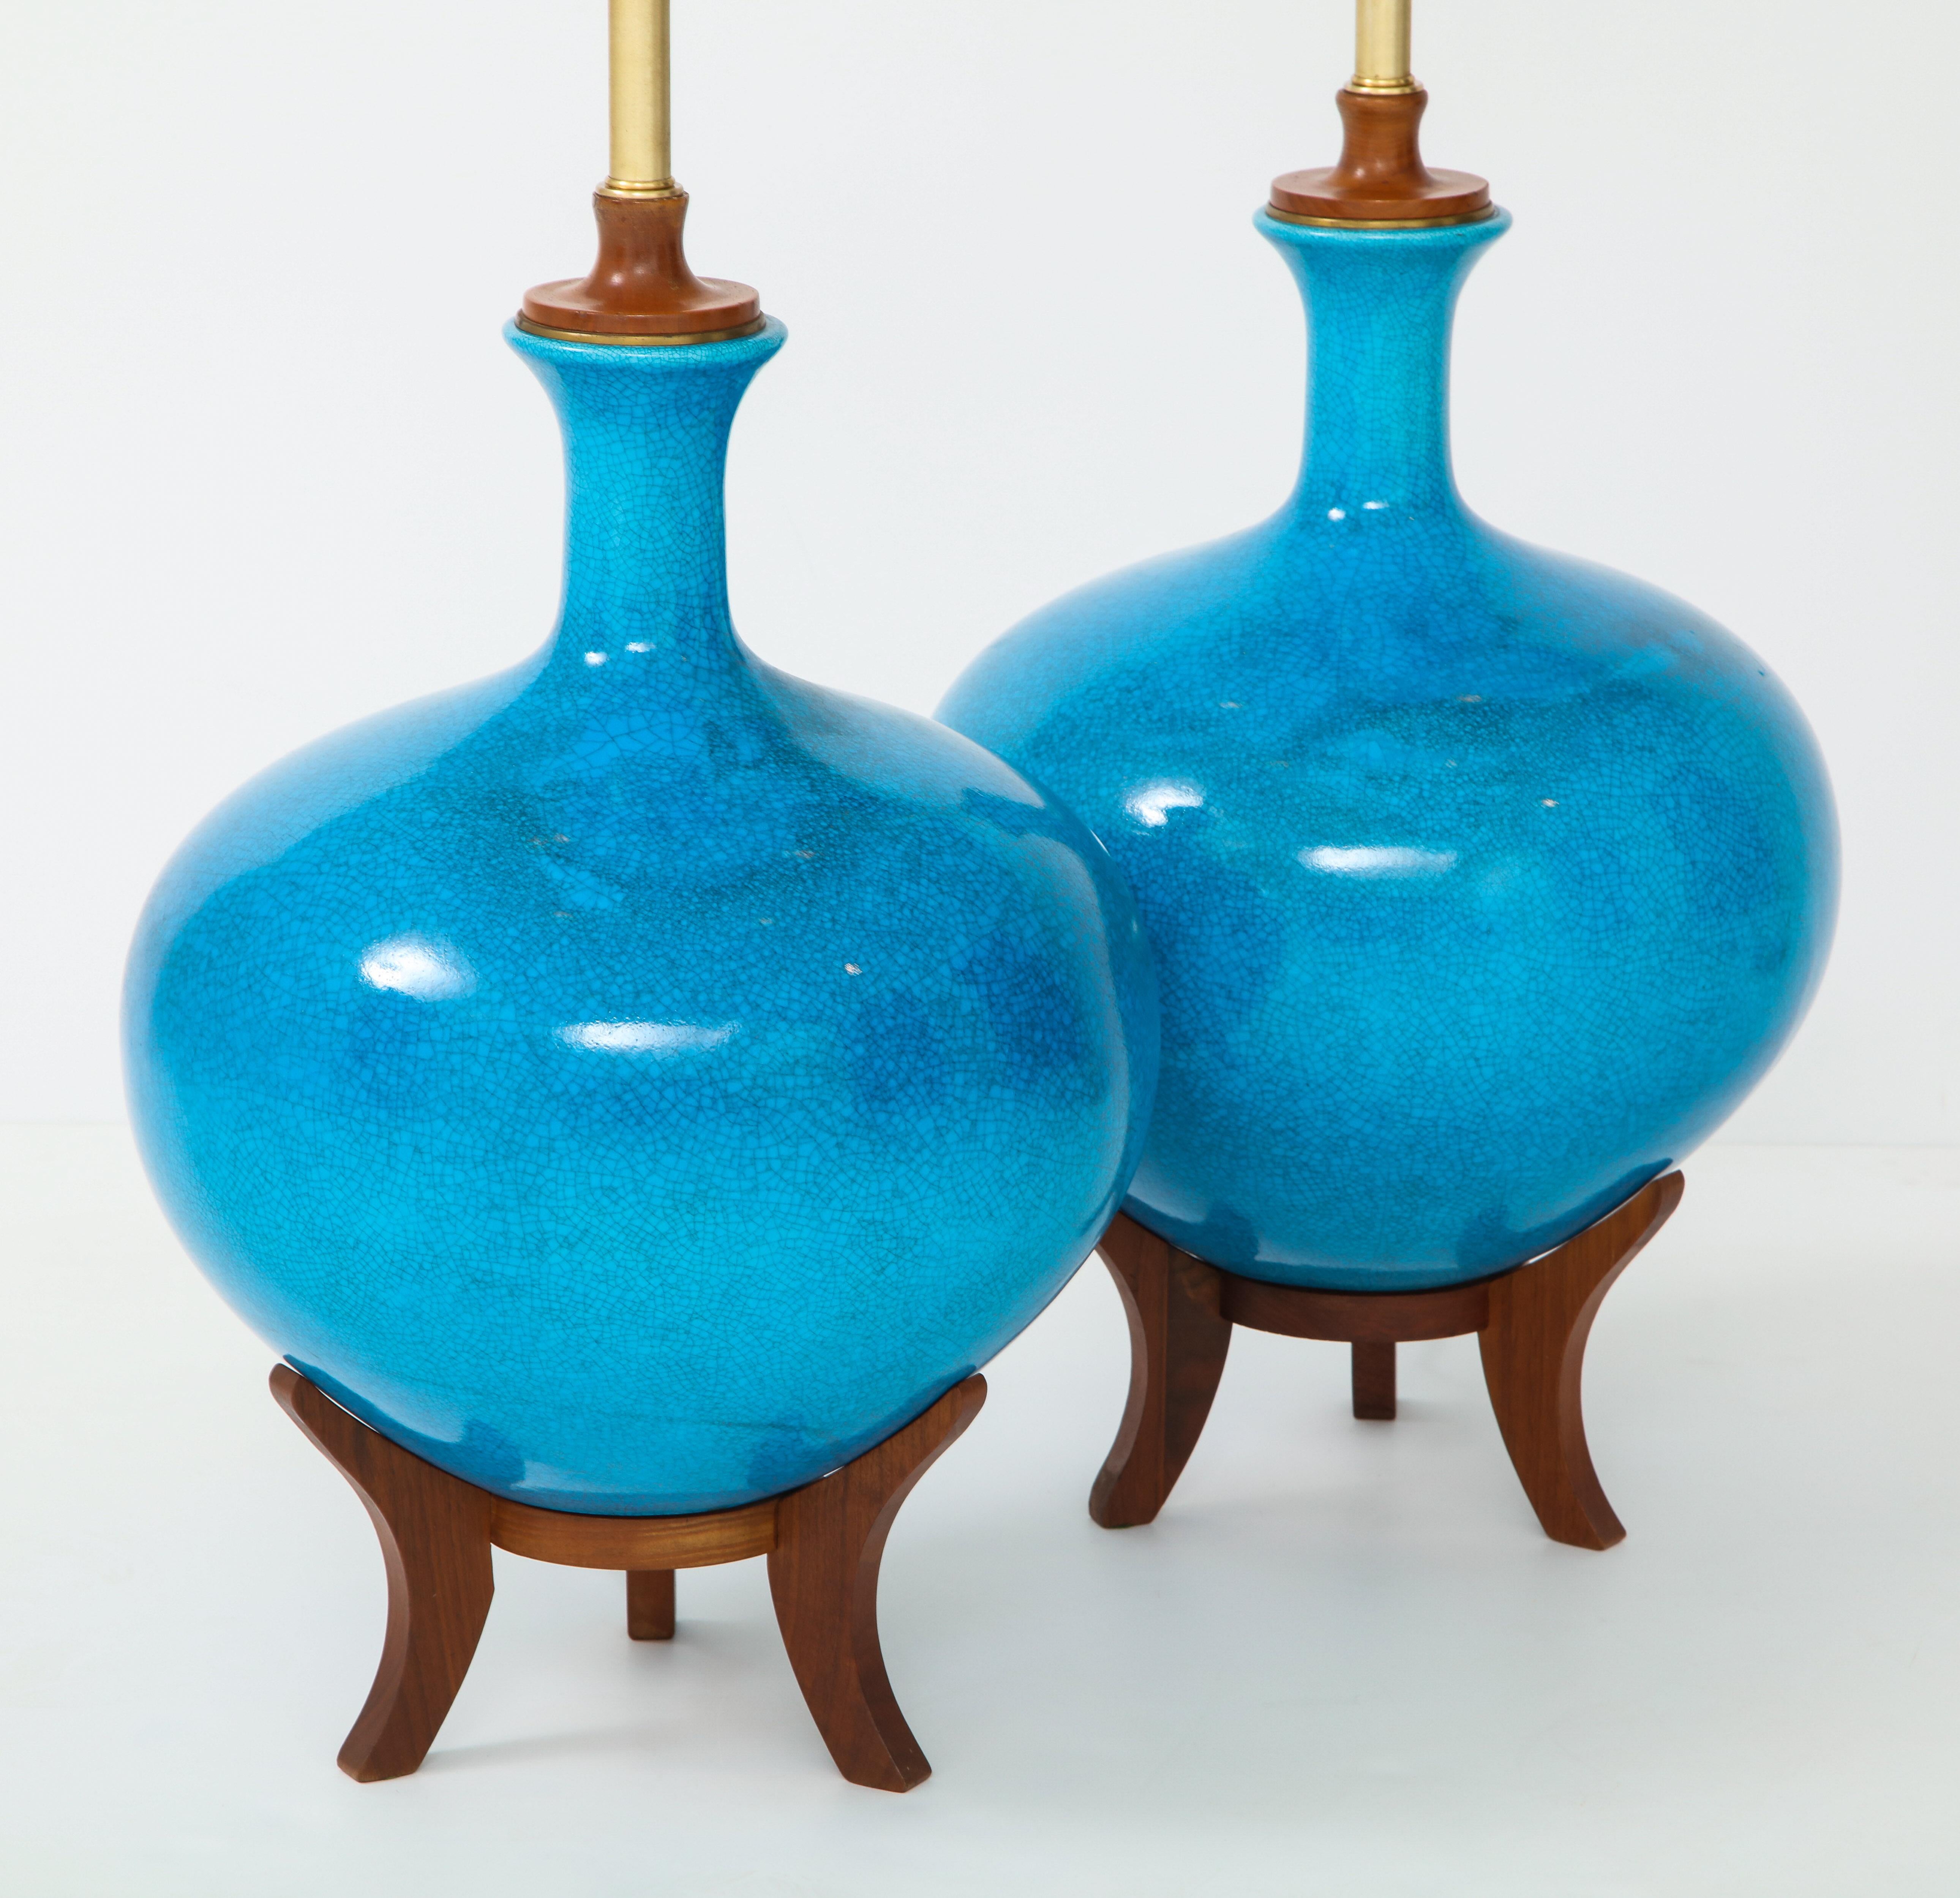 American Fabulous Pair of Mid-Century Lamps with a Cerulean Blue Glazed Finish